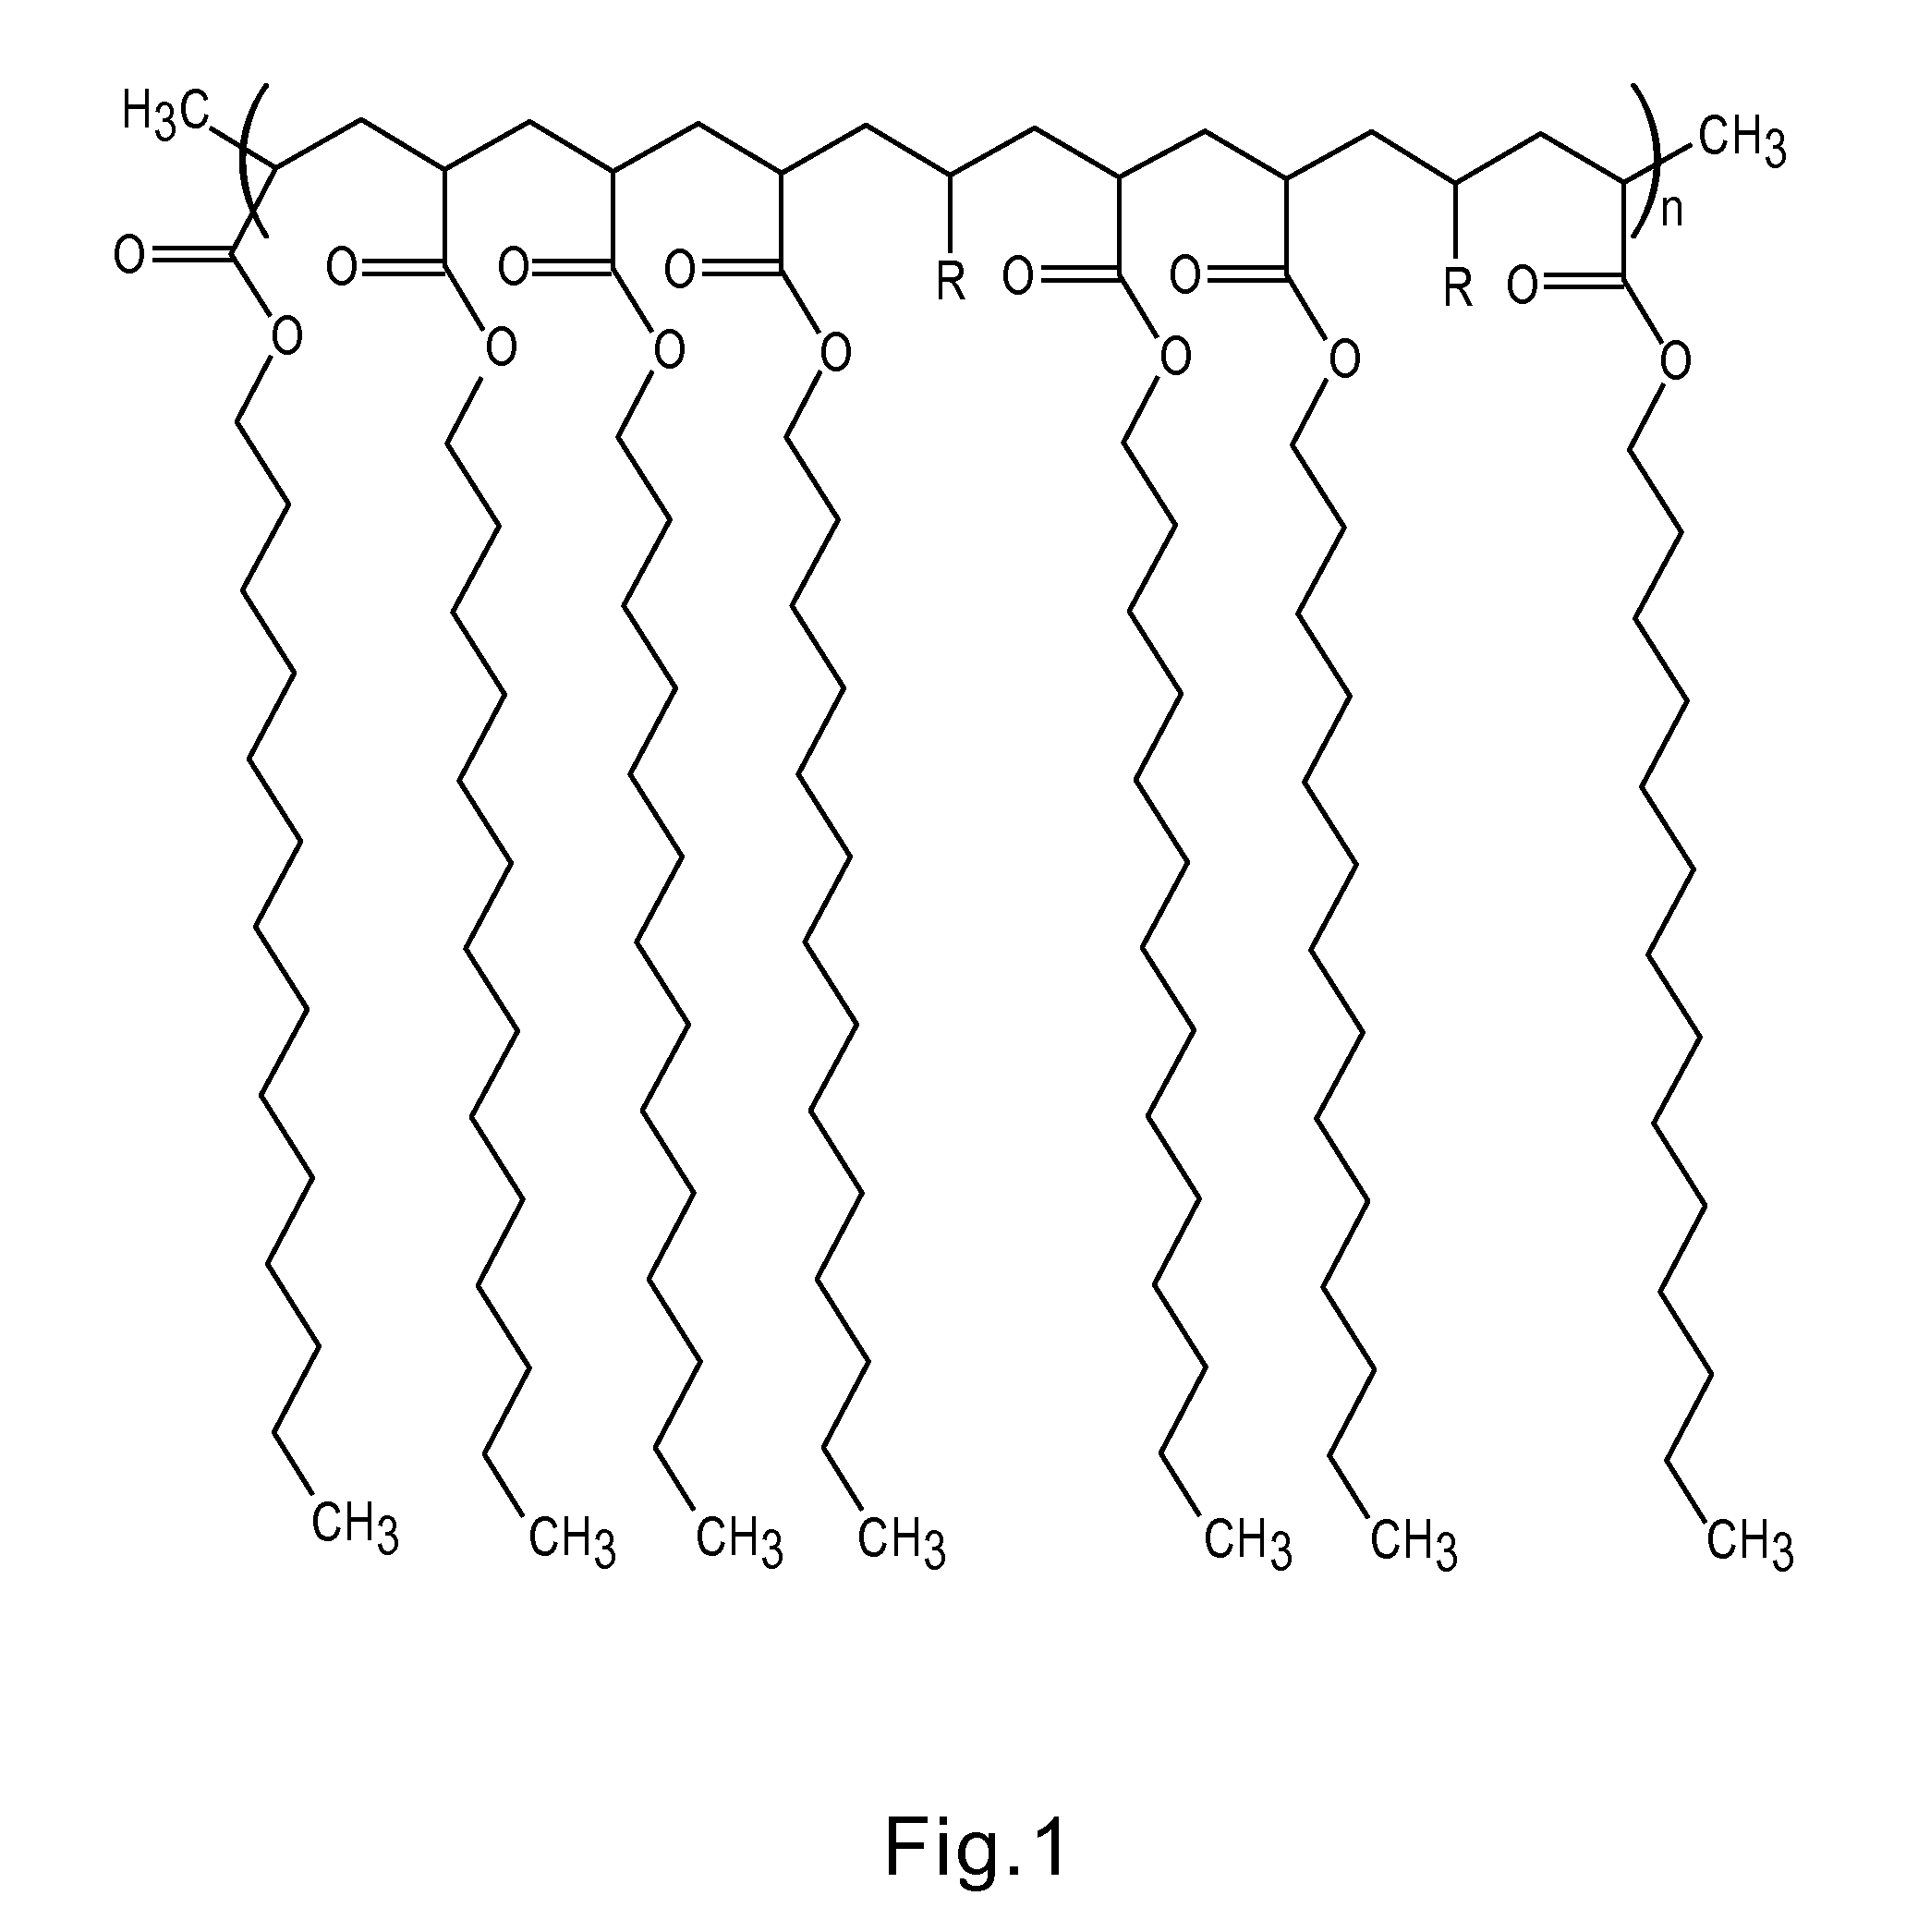 Articles containing functional polymeric phase change materials and methods of manufacturing the same